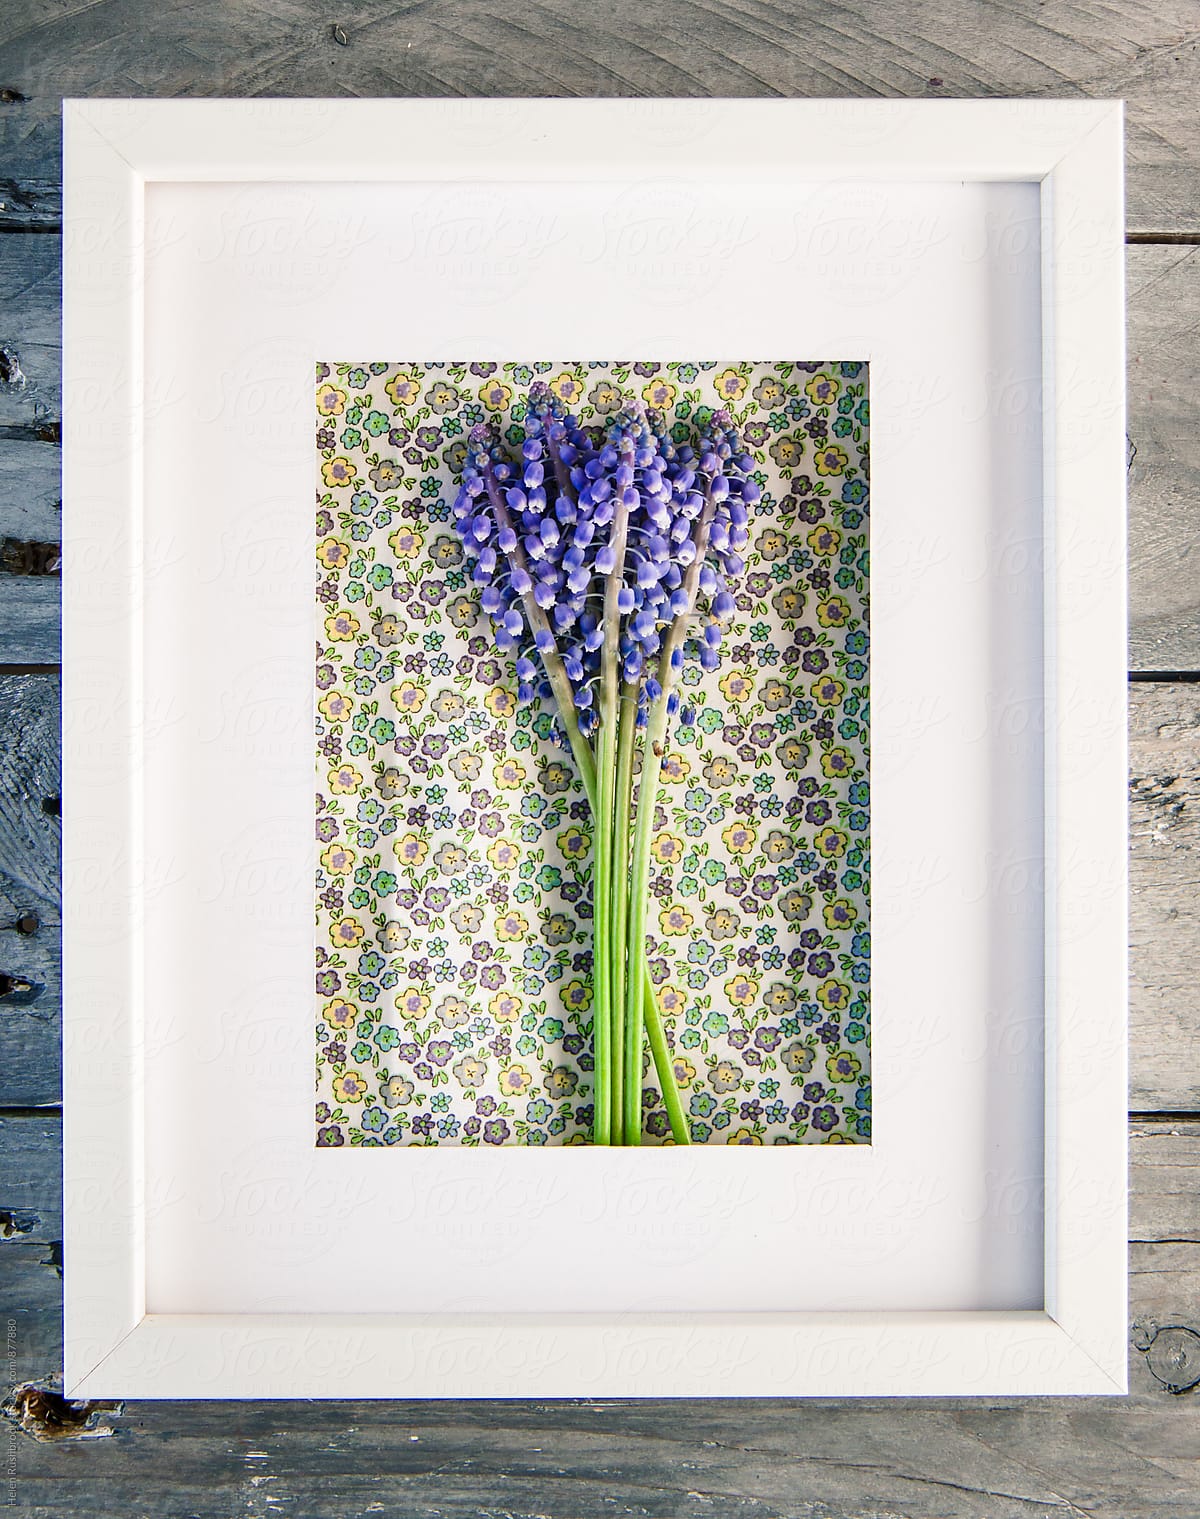 Grape Hyacinths and pretty fabric in a white frame